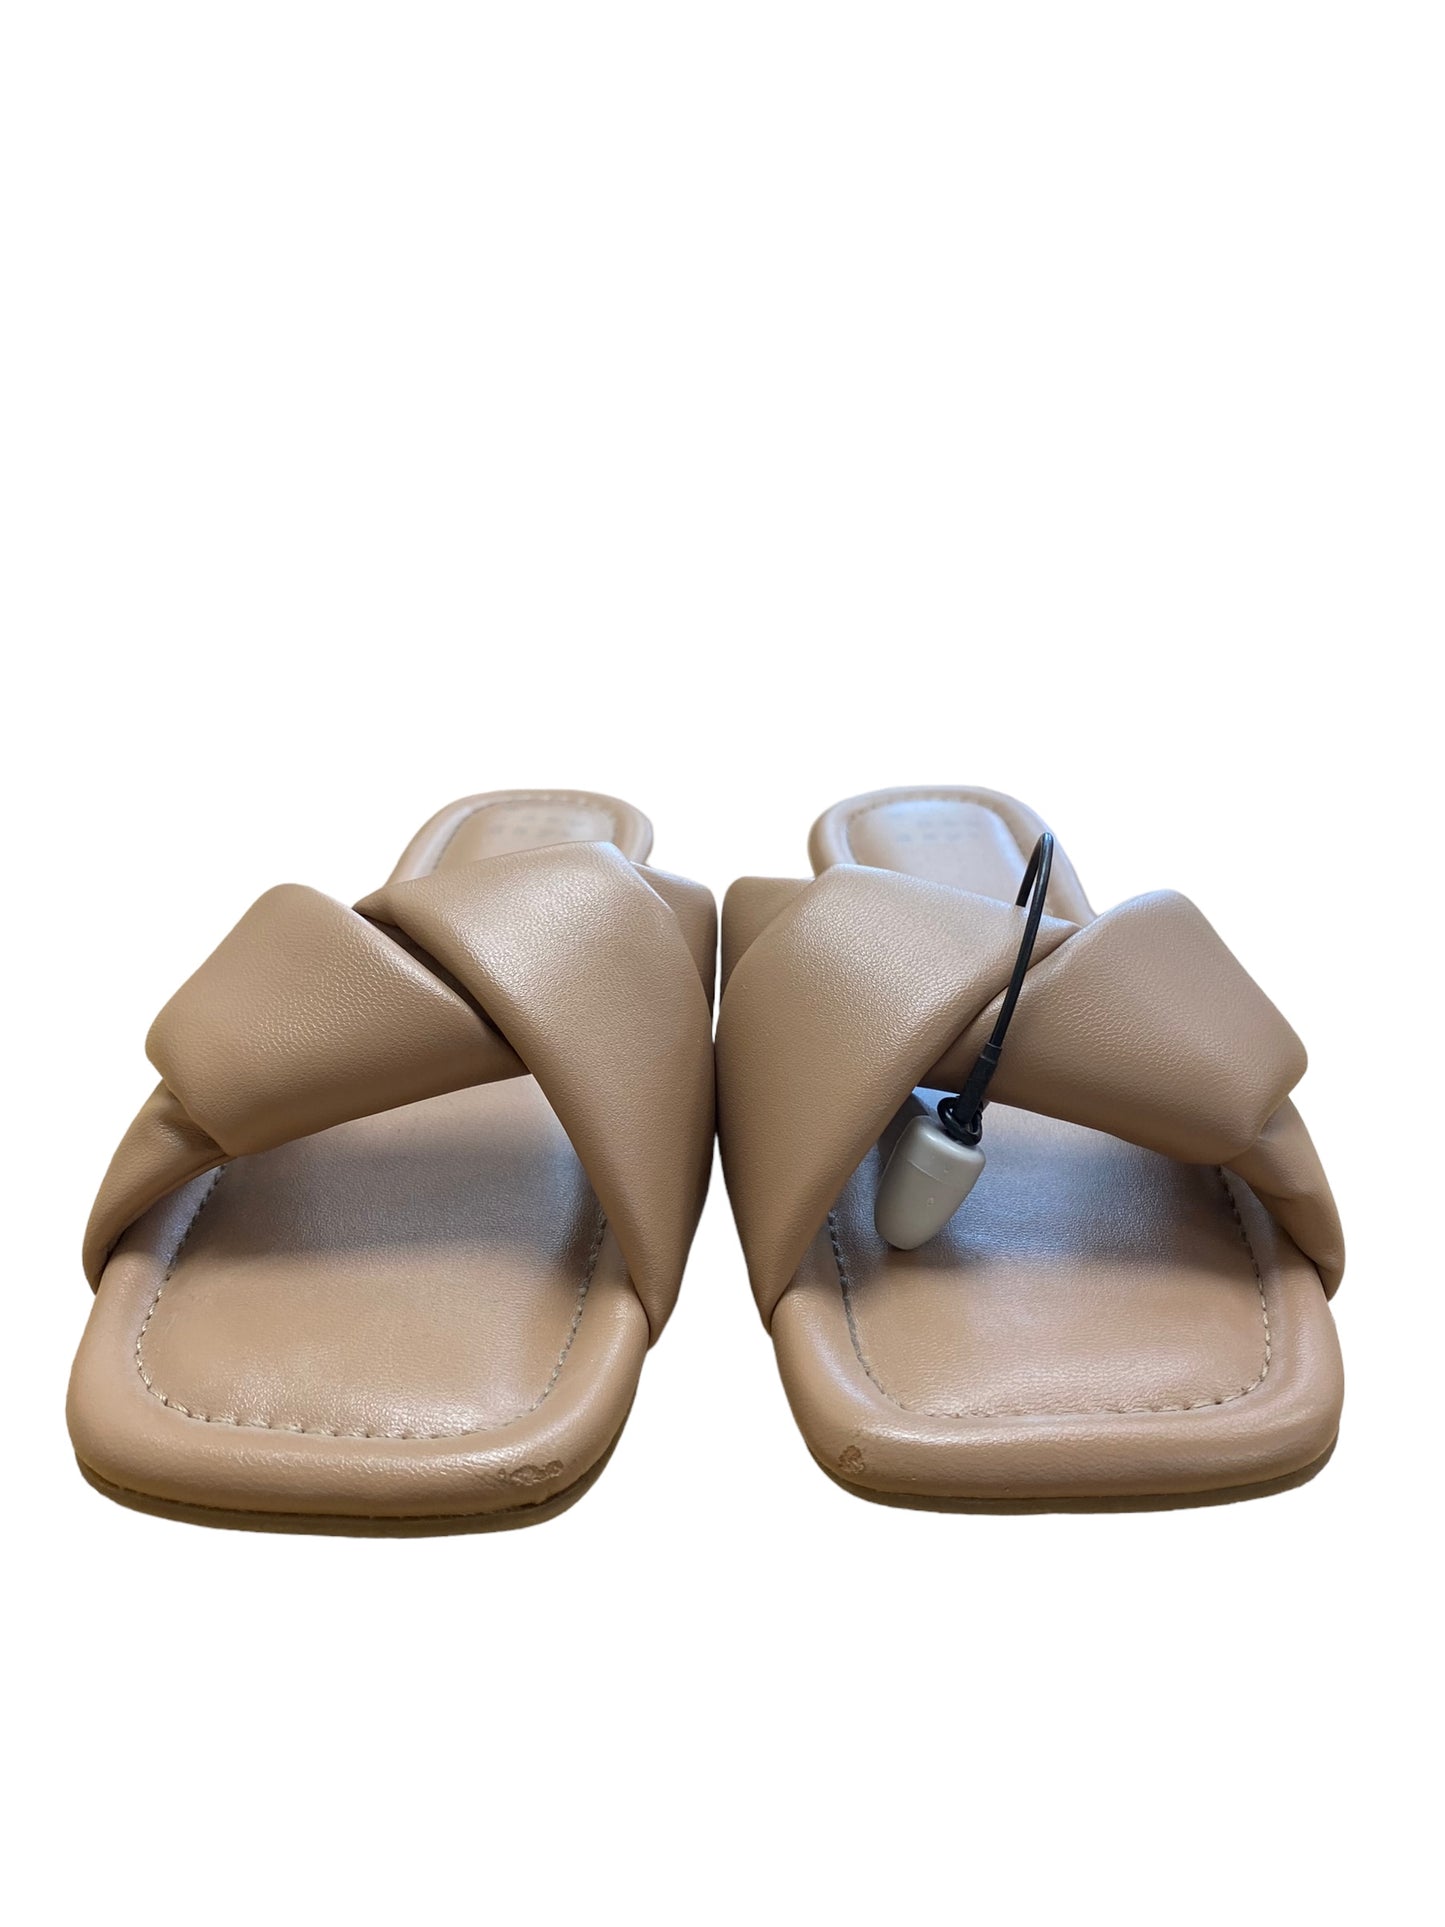 Sandals Flip Flops By A New Day  Size: 6.5